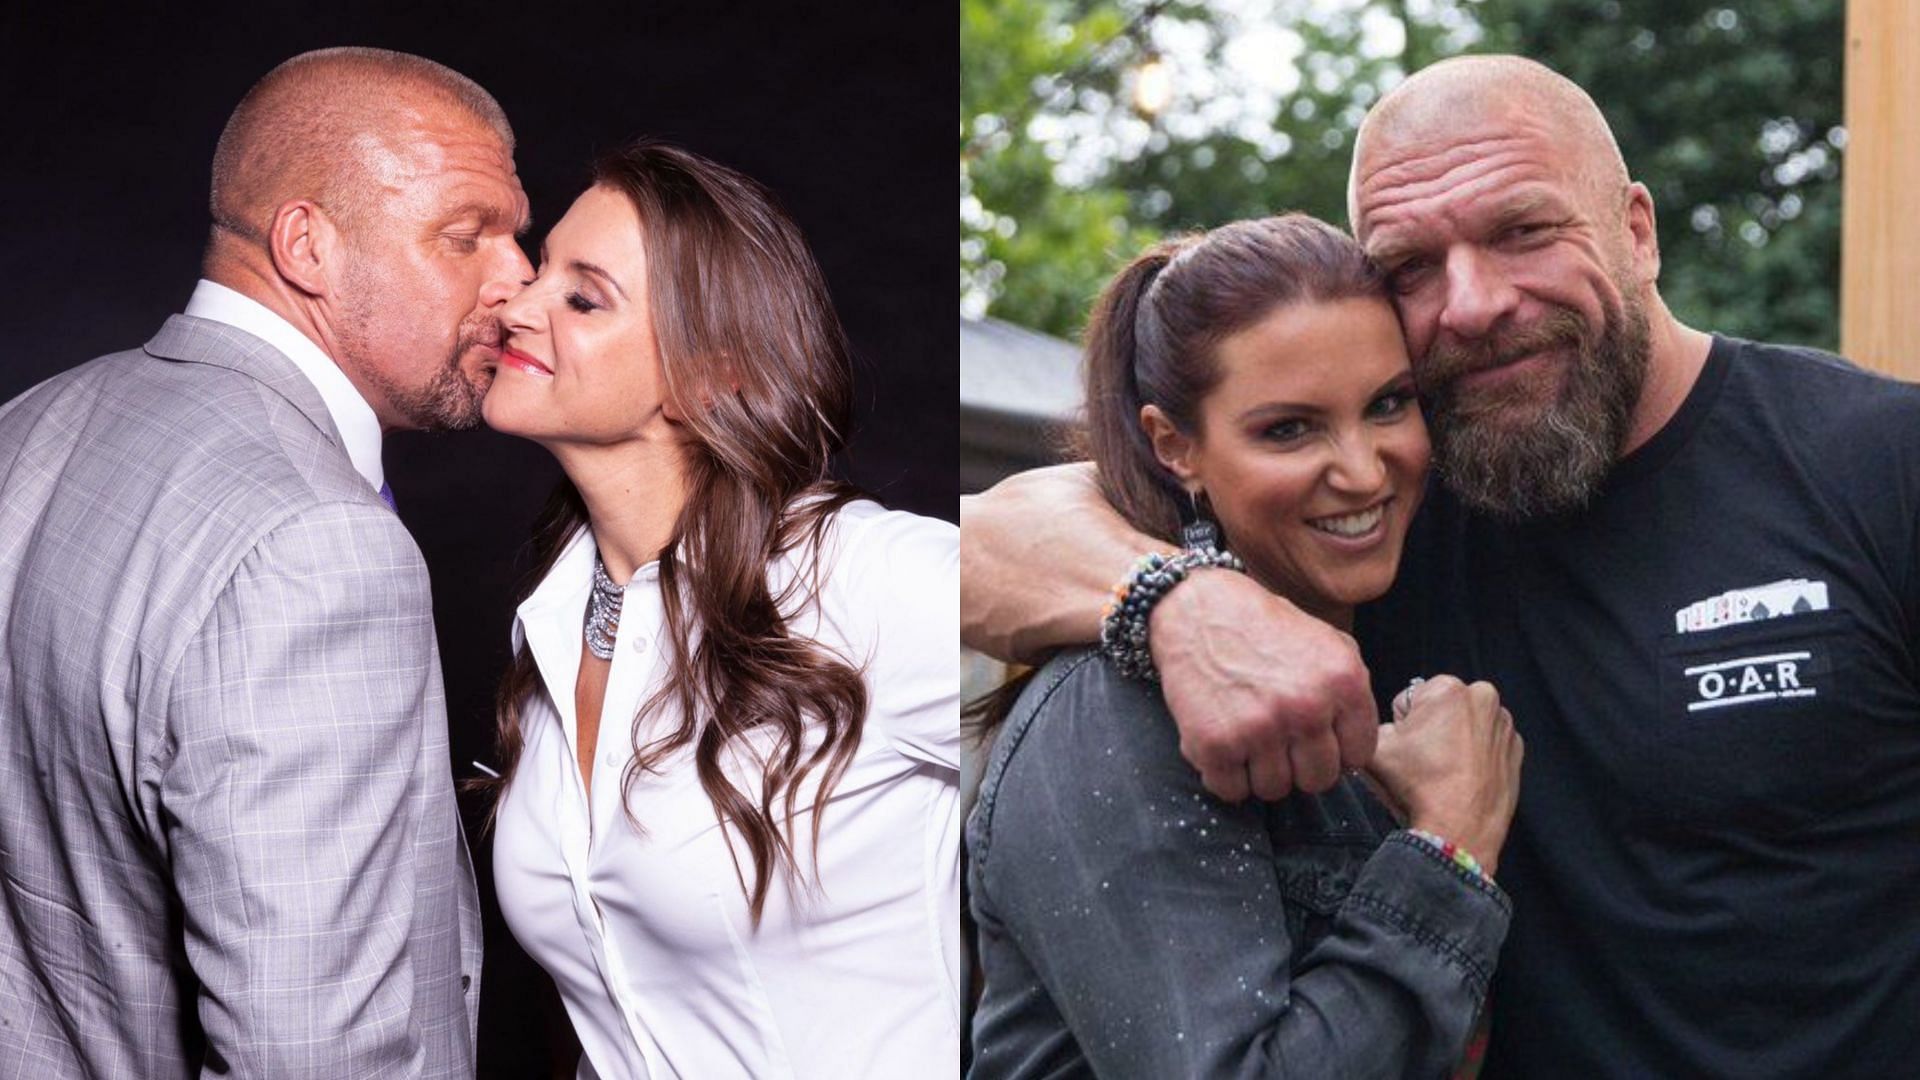 Triple H and Stephanie McMahon married in 2003